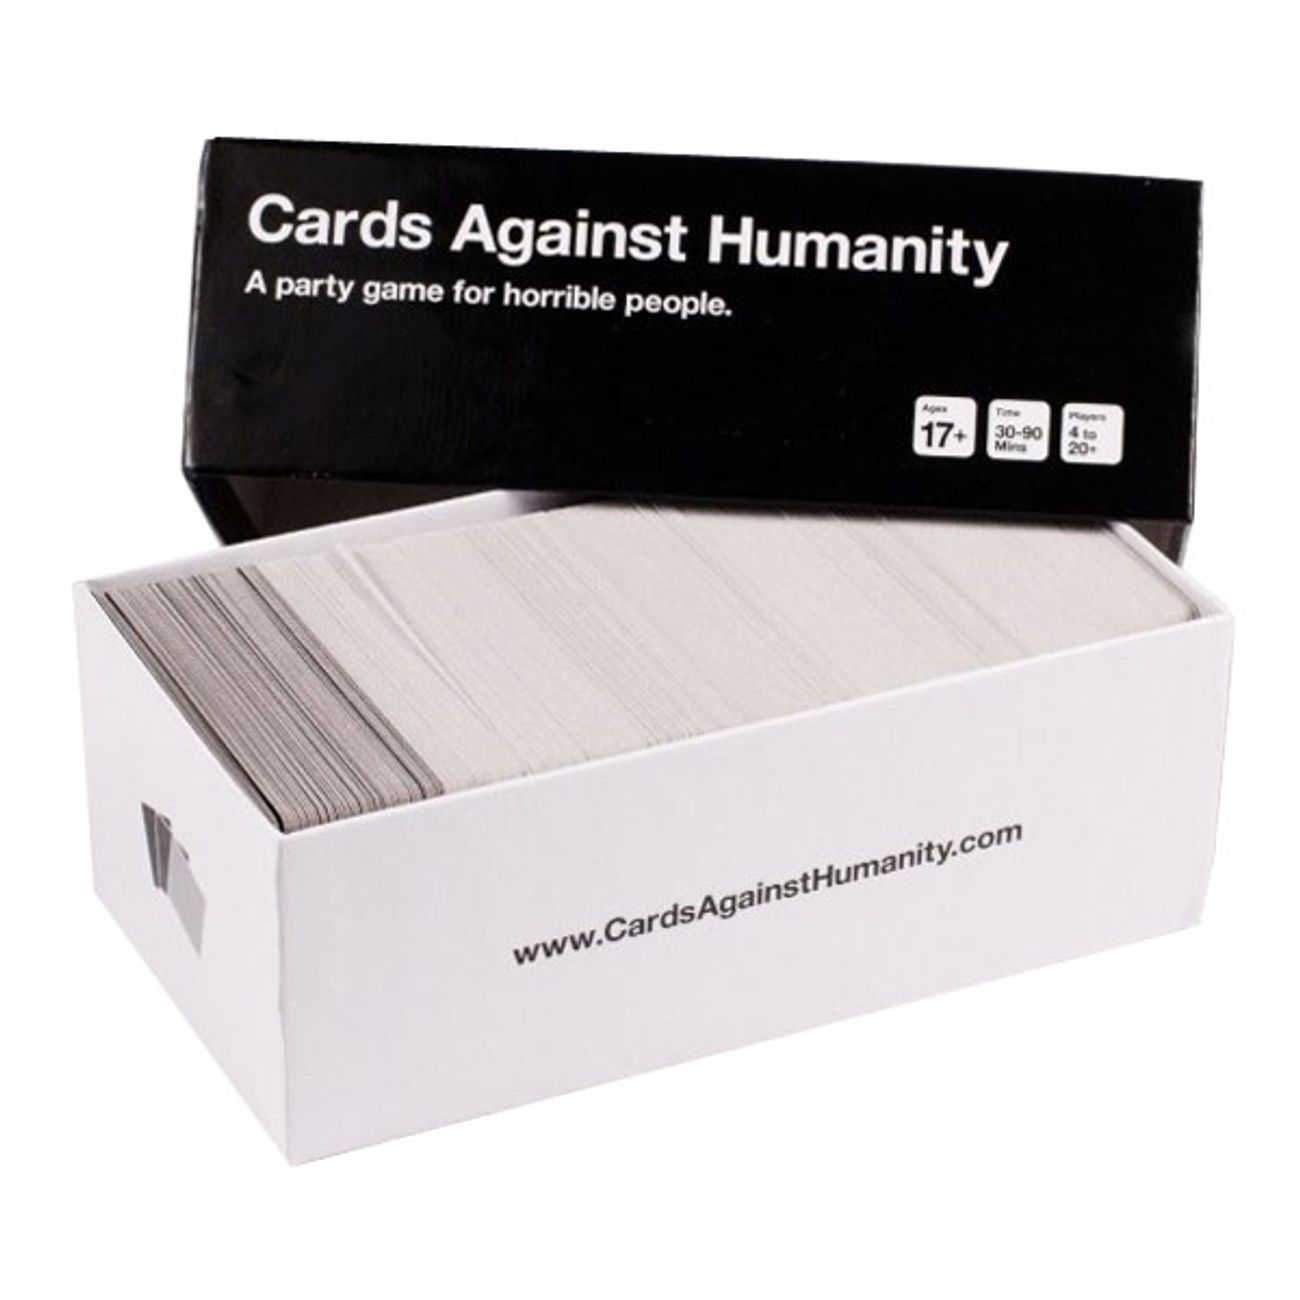 Cards Against Humanity - Wikipedia